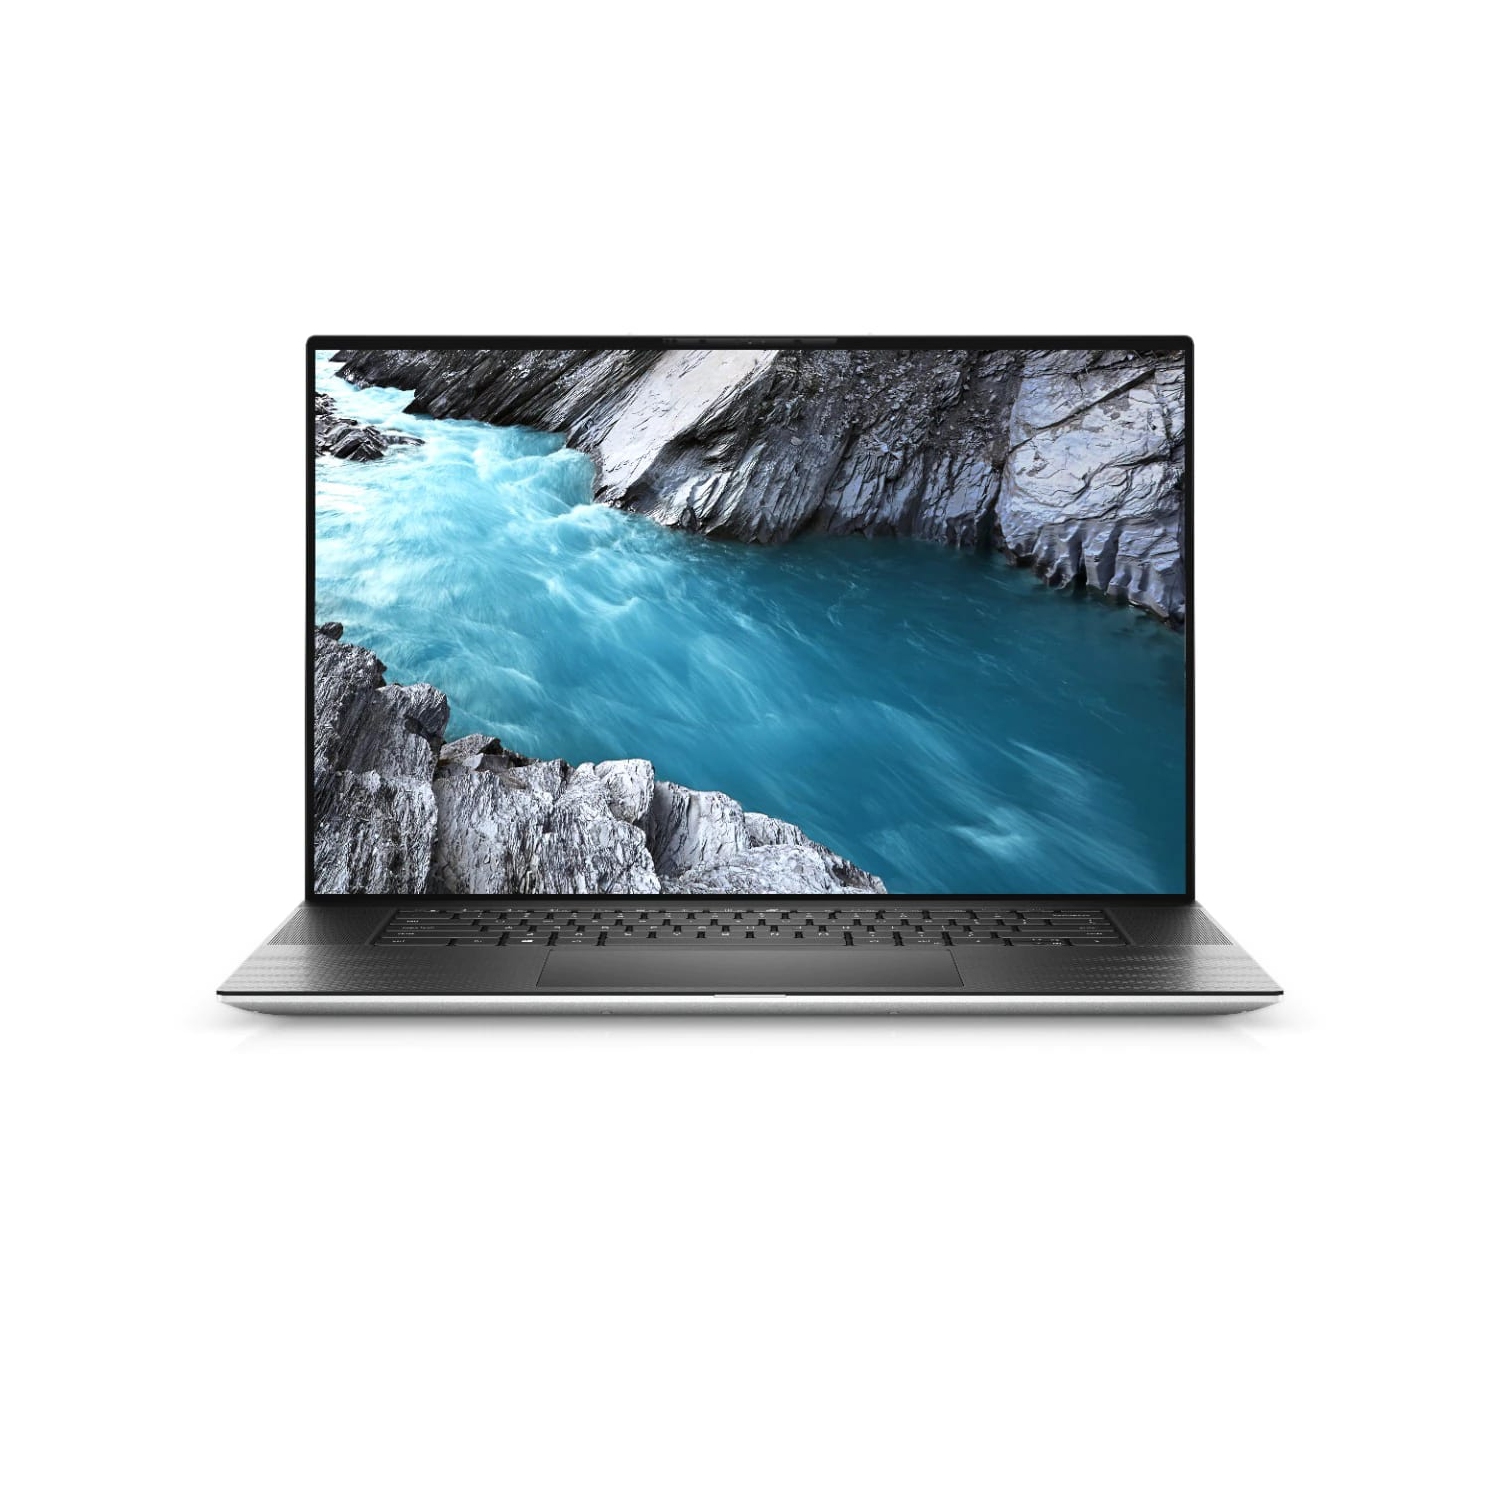 Refurbished (Excellent) - Dell XPS 17 9700 Laptop (2020) | 17" FHD+ | Core i9 - 1TB SSD - 16GB RAM - RTX 2060 | 8 Cores @ 5.3 GHz - 10th Gen CPU Certified Refurbished